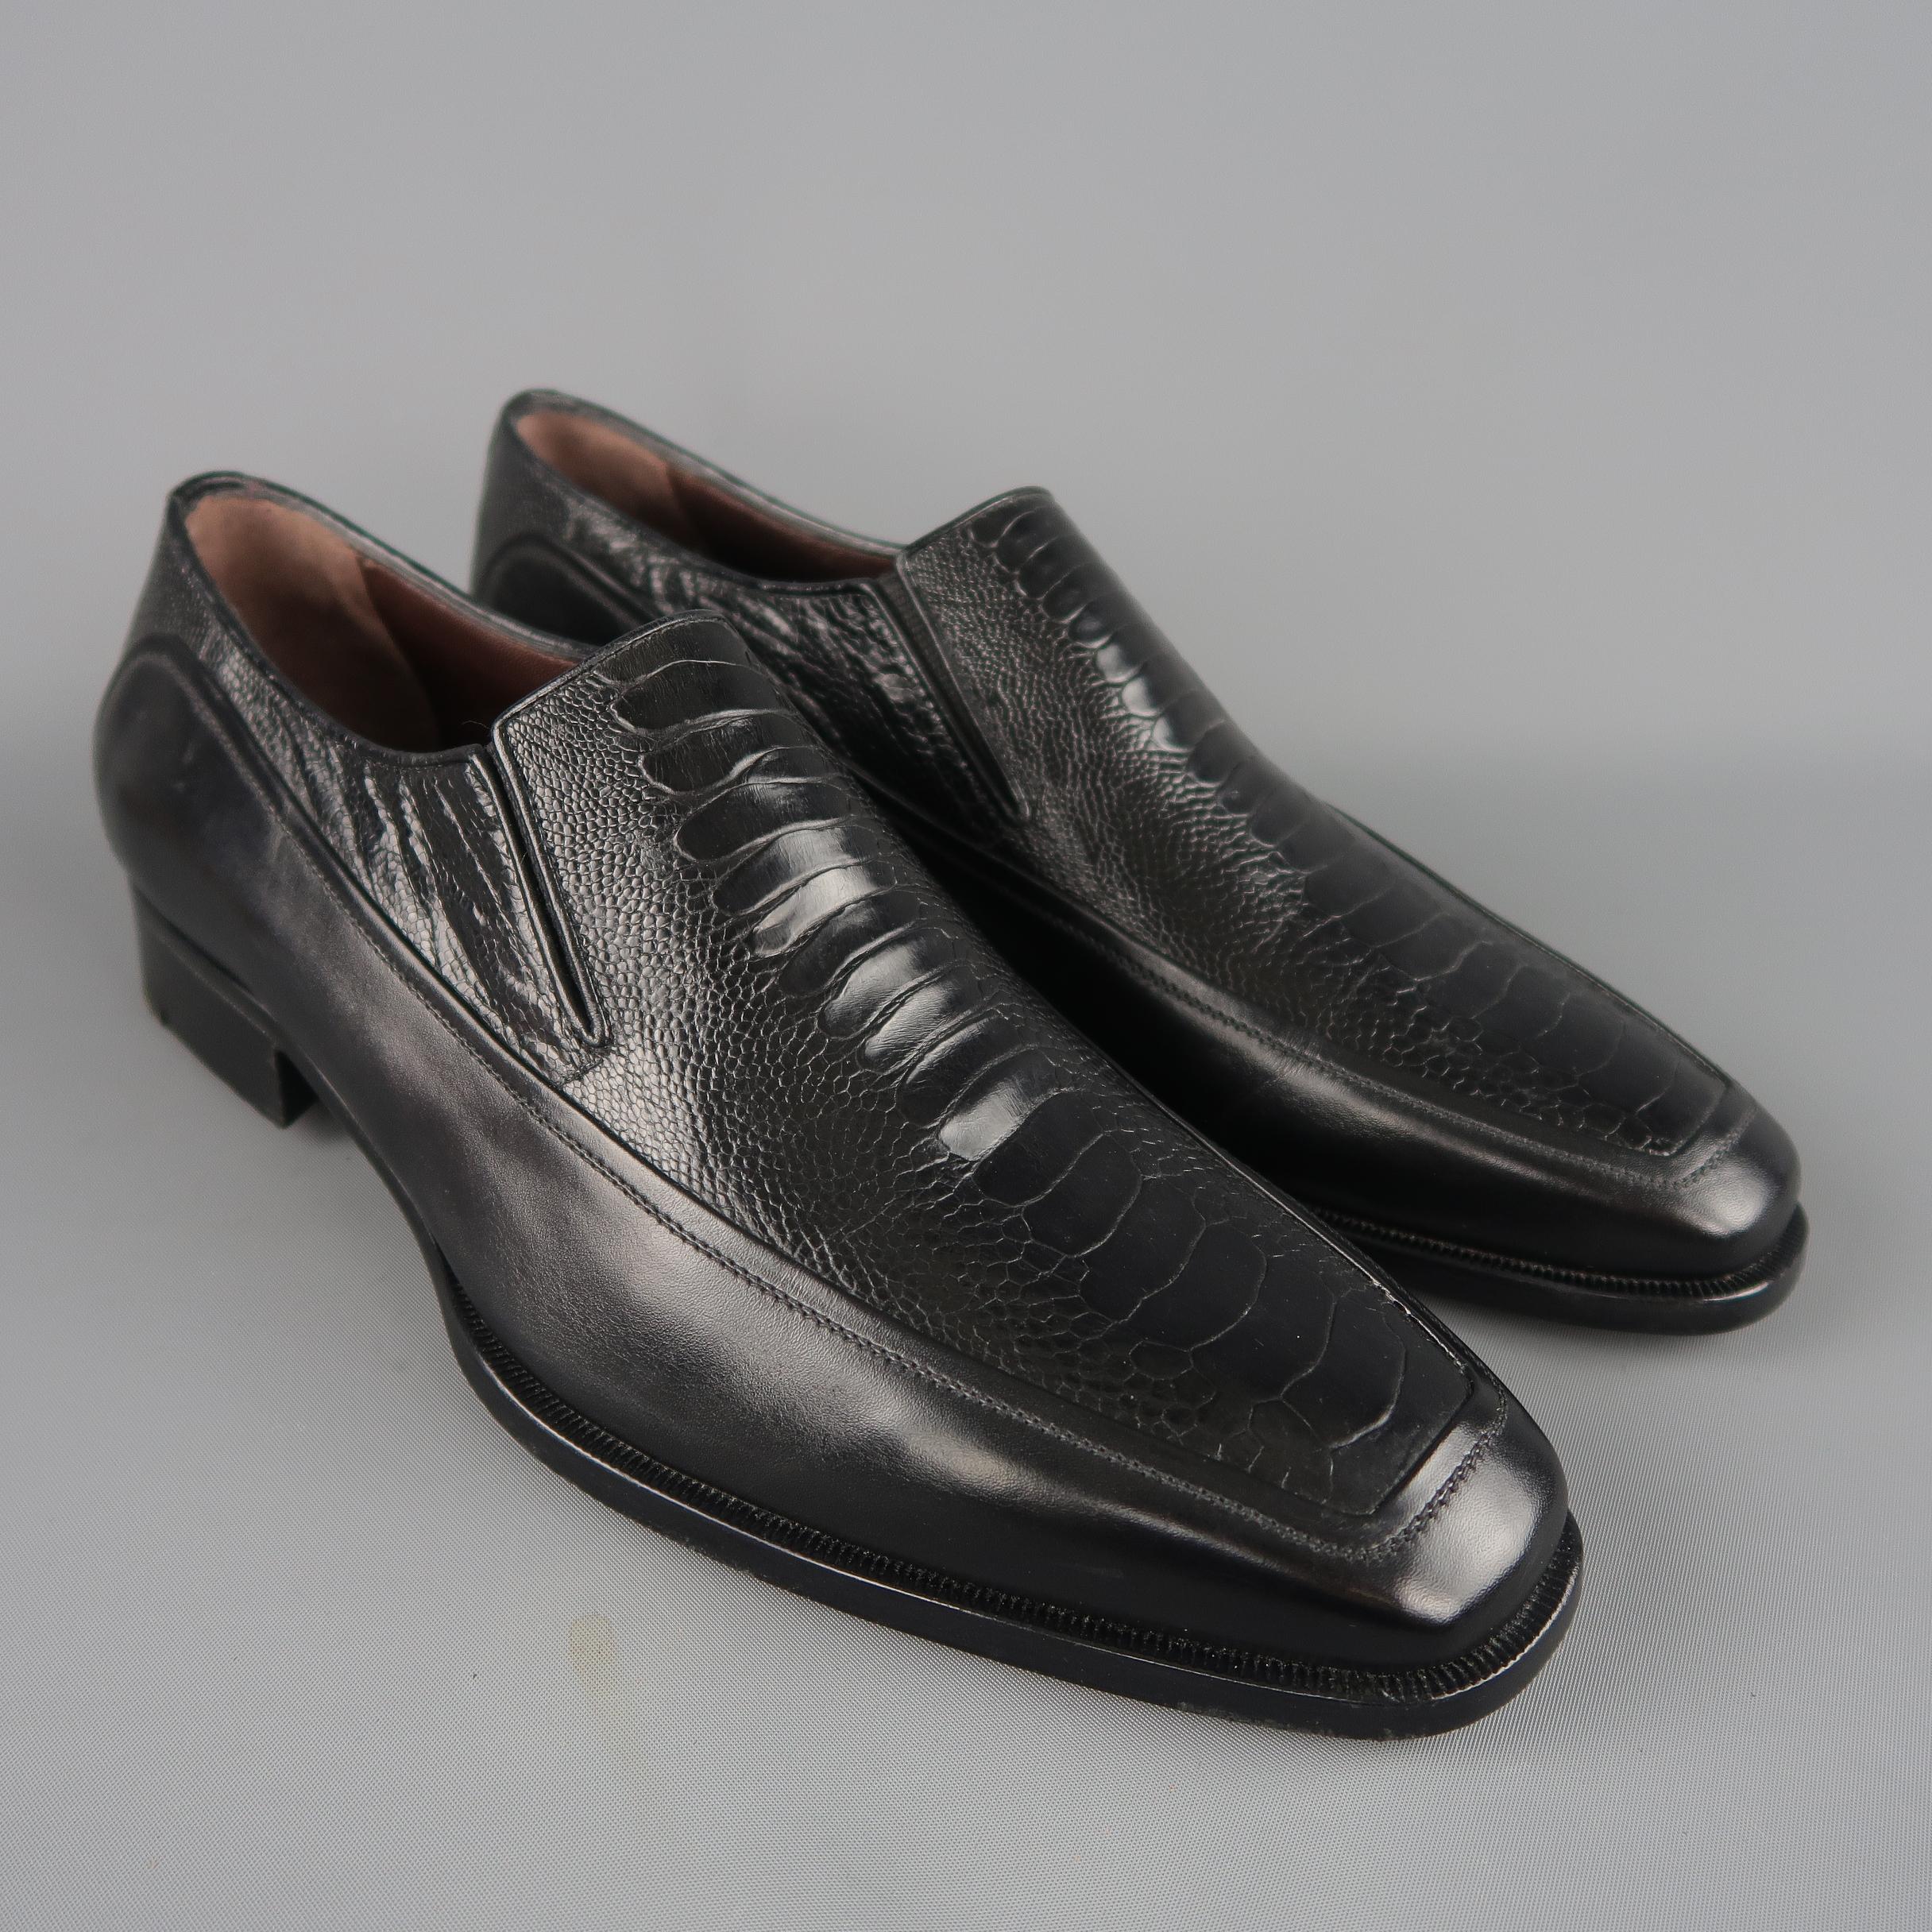 A.Testoni dress loafers come in smooth black leather with a tapered square apron toe and lizard textured leather upper panel. Made in Italy. Brand New.
Marked: UK 7.5